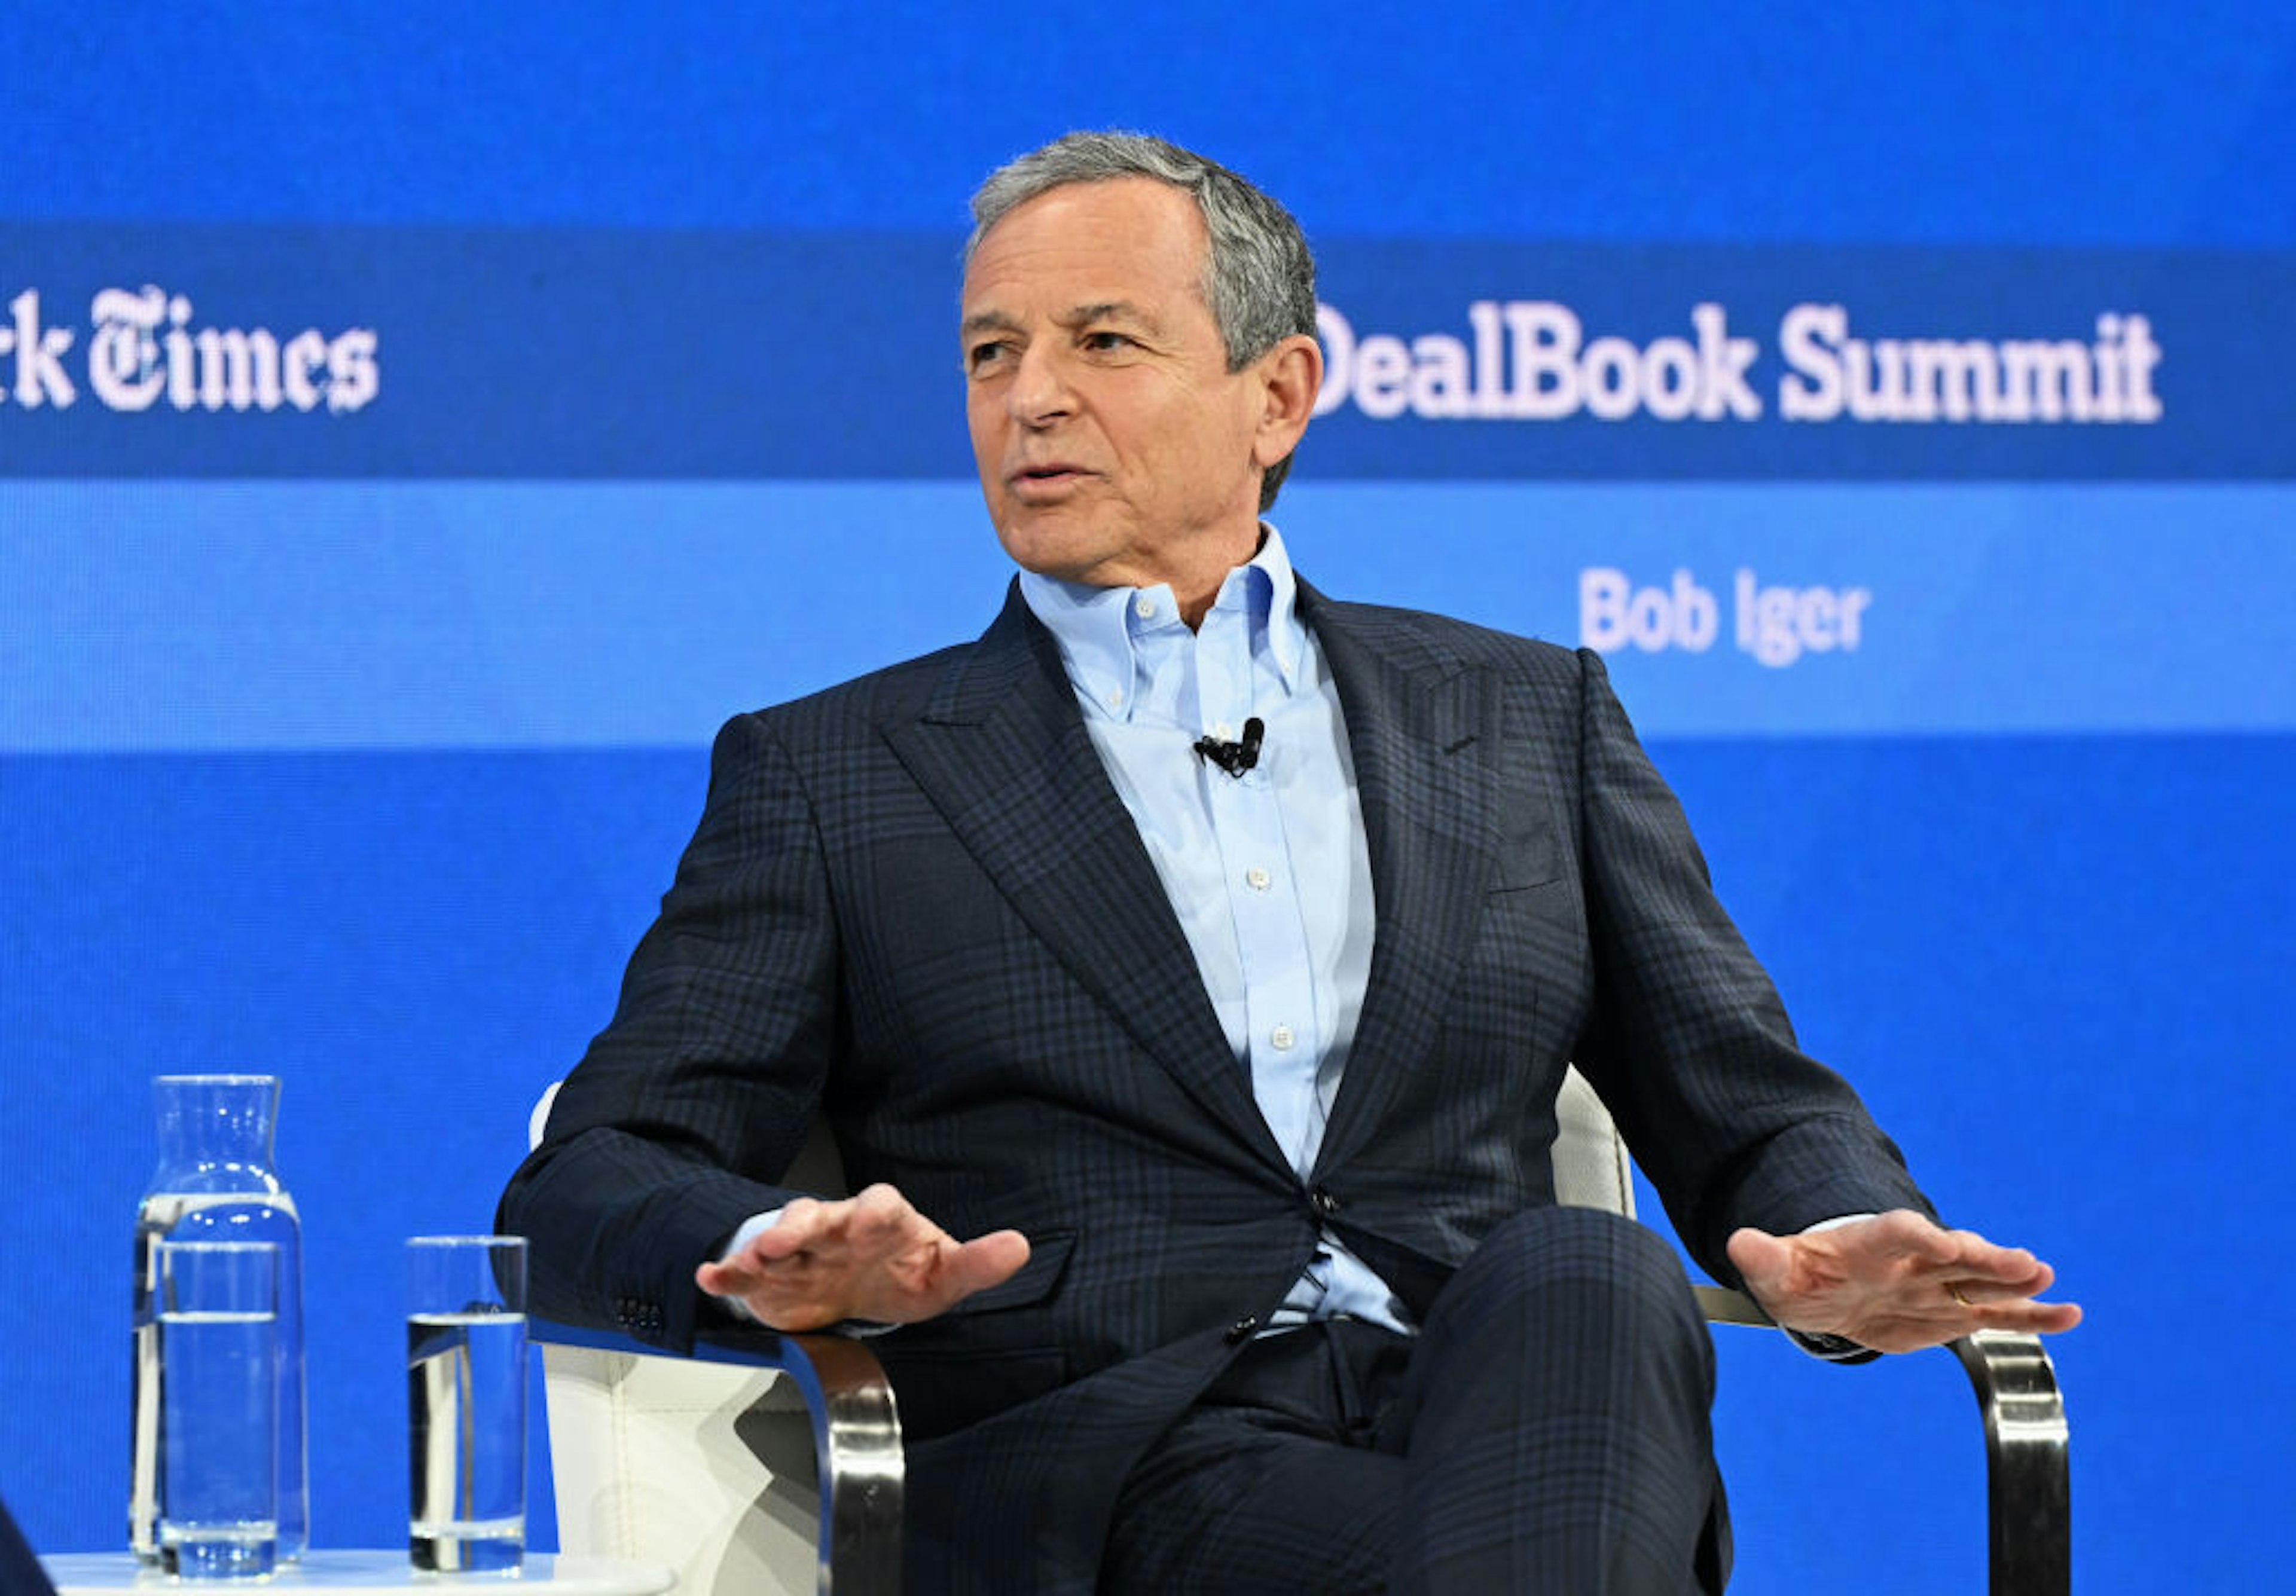 NEW YORK, NEW YORK - NOVEMBER 29: Robert Iger speaks onstage during The New York Times Dealbook Summit 2023 at Jazz at Lincoln Center on November 29, 2023 in New York City. (Photo by Slaven Vlasic/Getty Images for The New York Times)